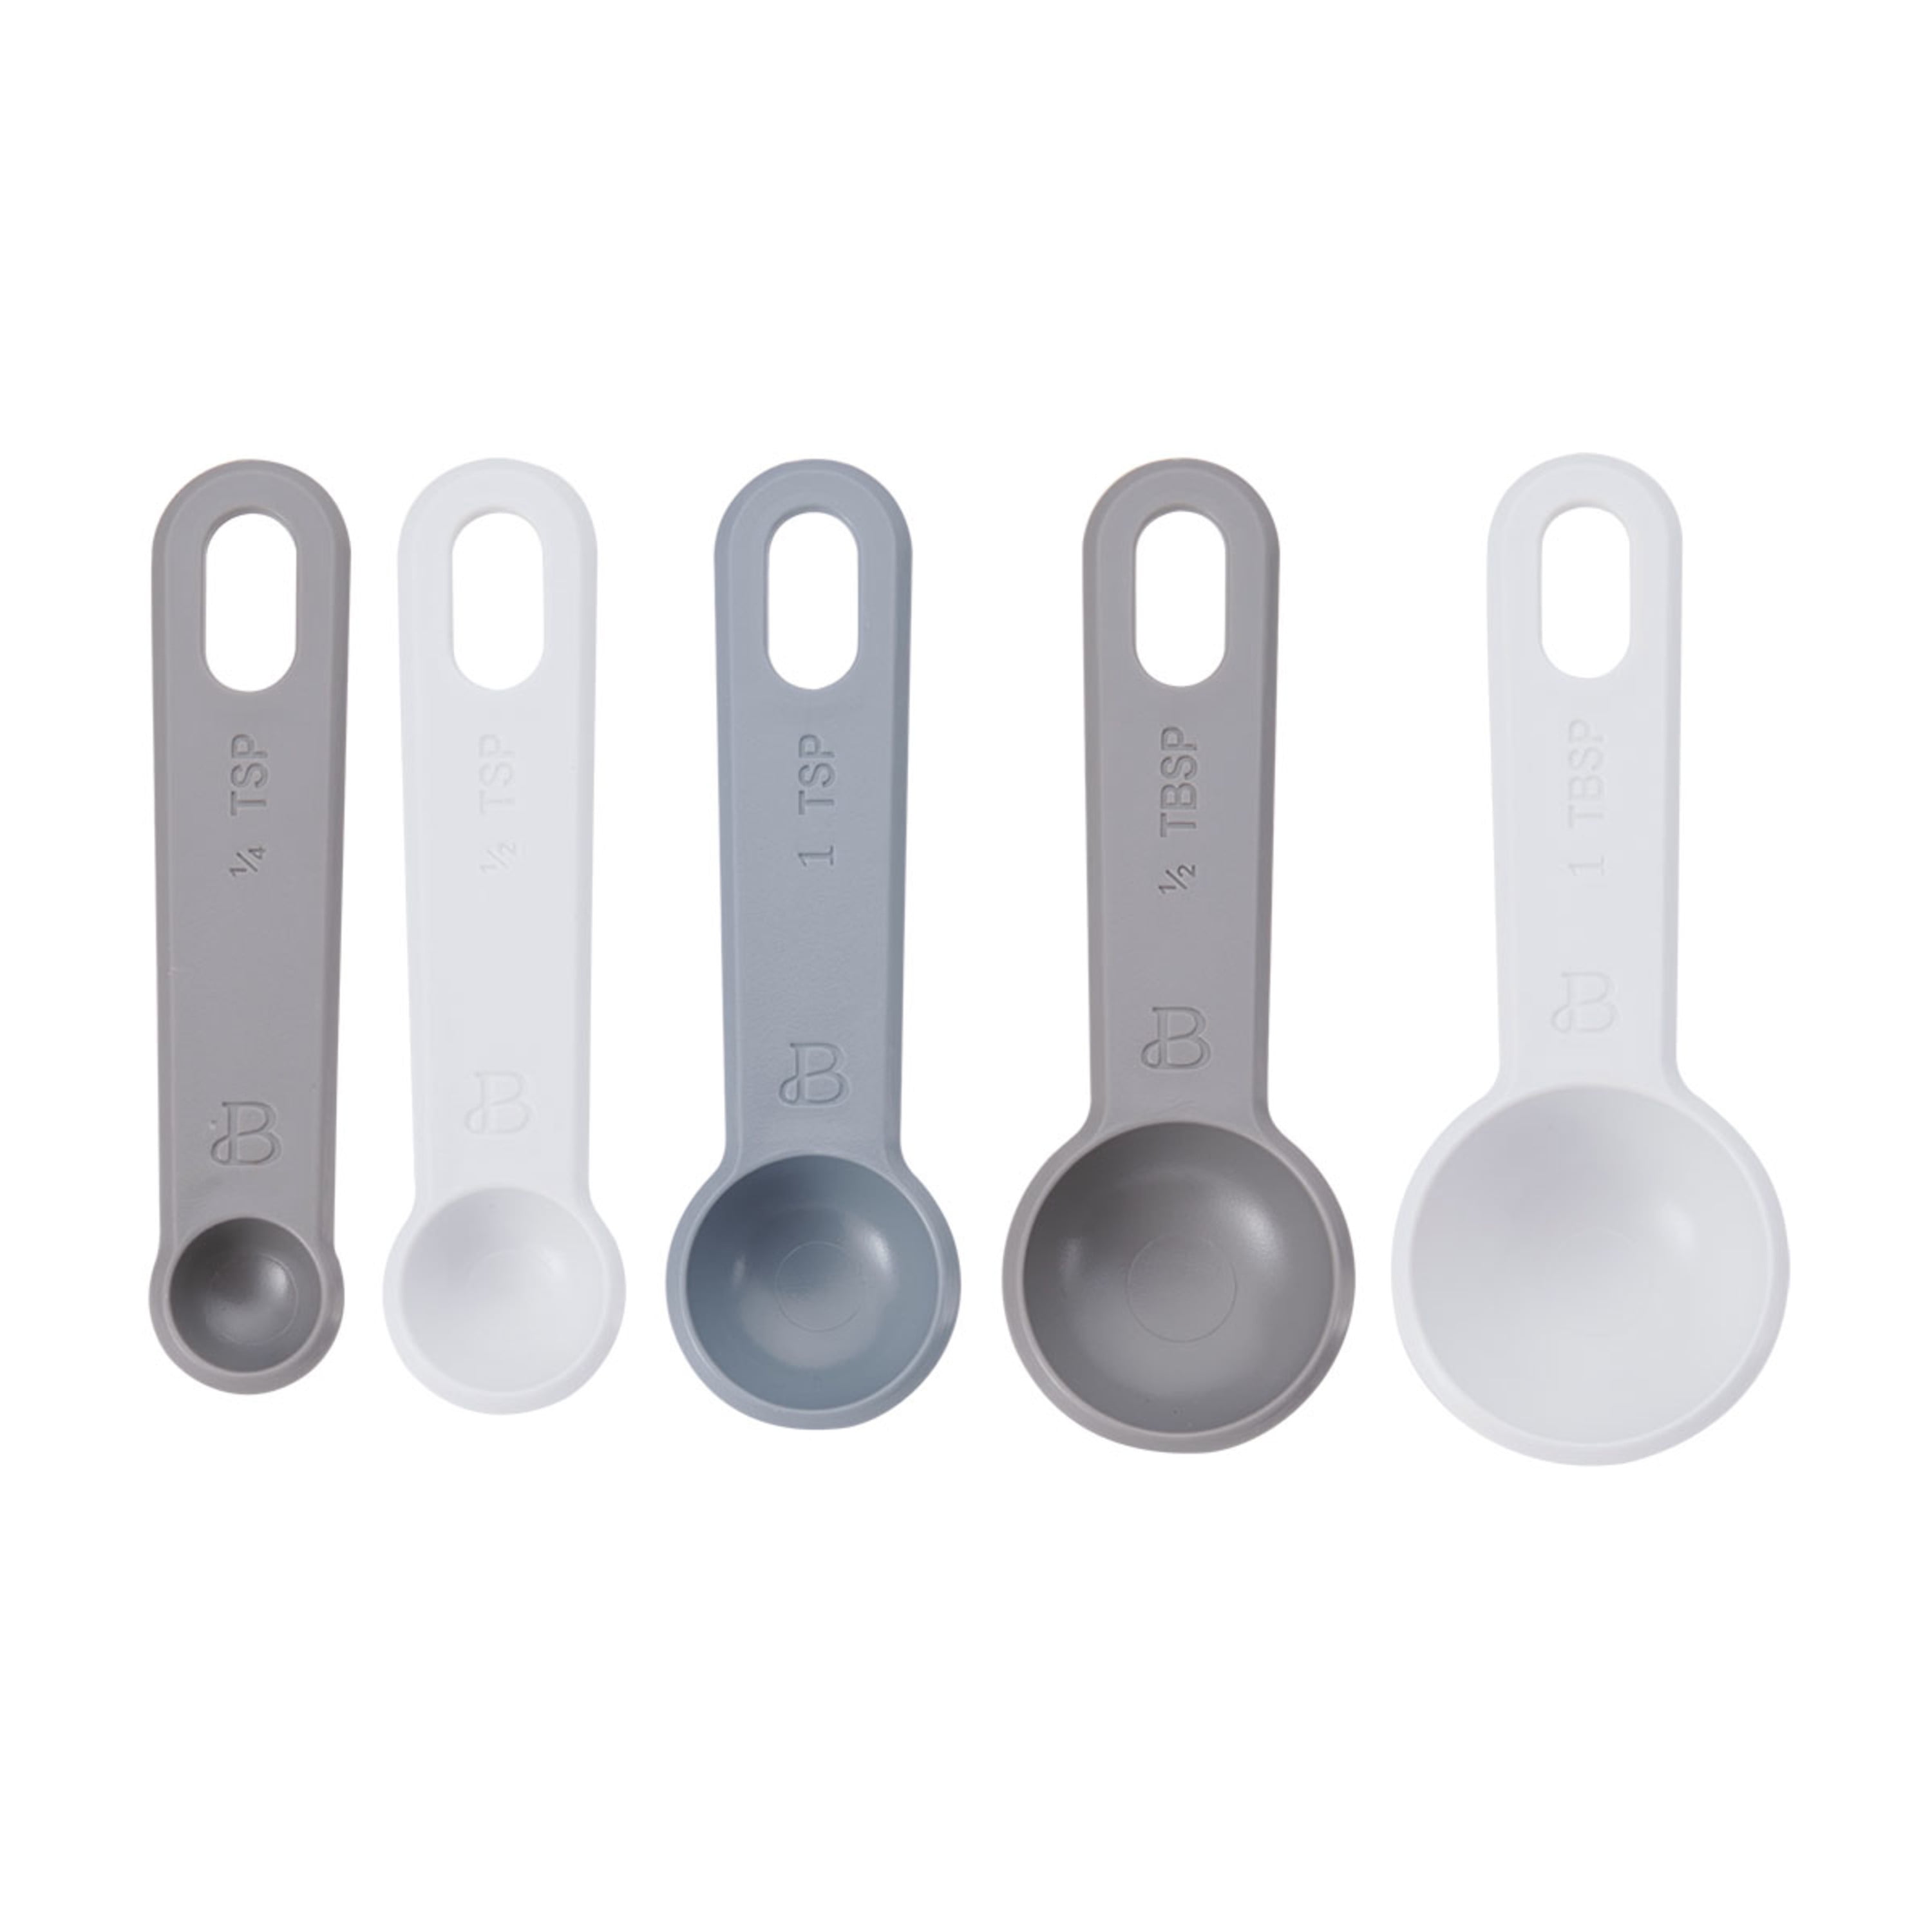 Beautiful Nesting Measuring Spoons with Ring in Assorted Colors by Drew  Barrymore 